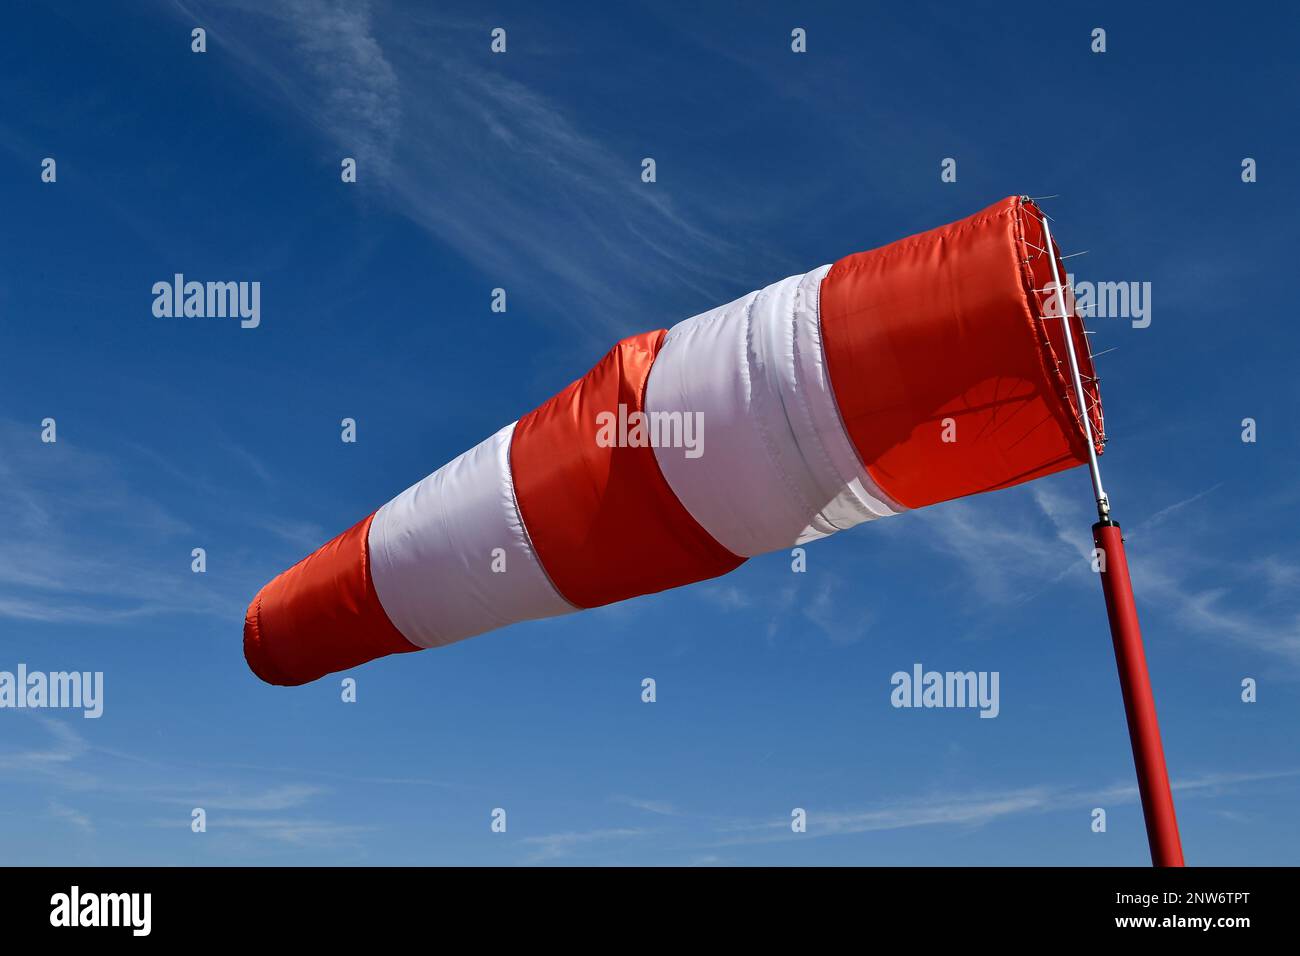 wind direction indicator, windy, Wind, Storm, Weather, Flag, Banner, sign, crosswind, Aviation, Airport, Bavaria, Germany Stock Photo